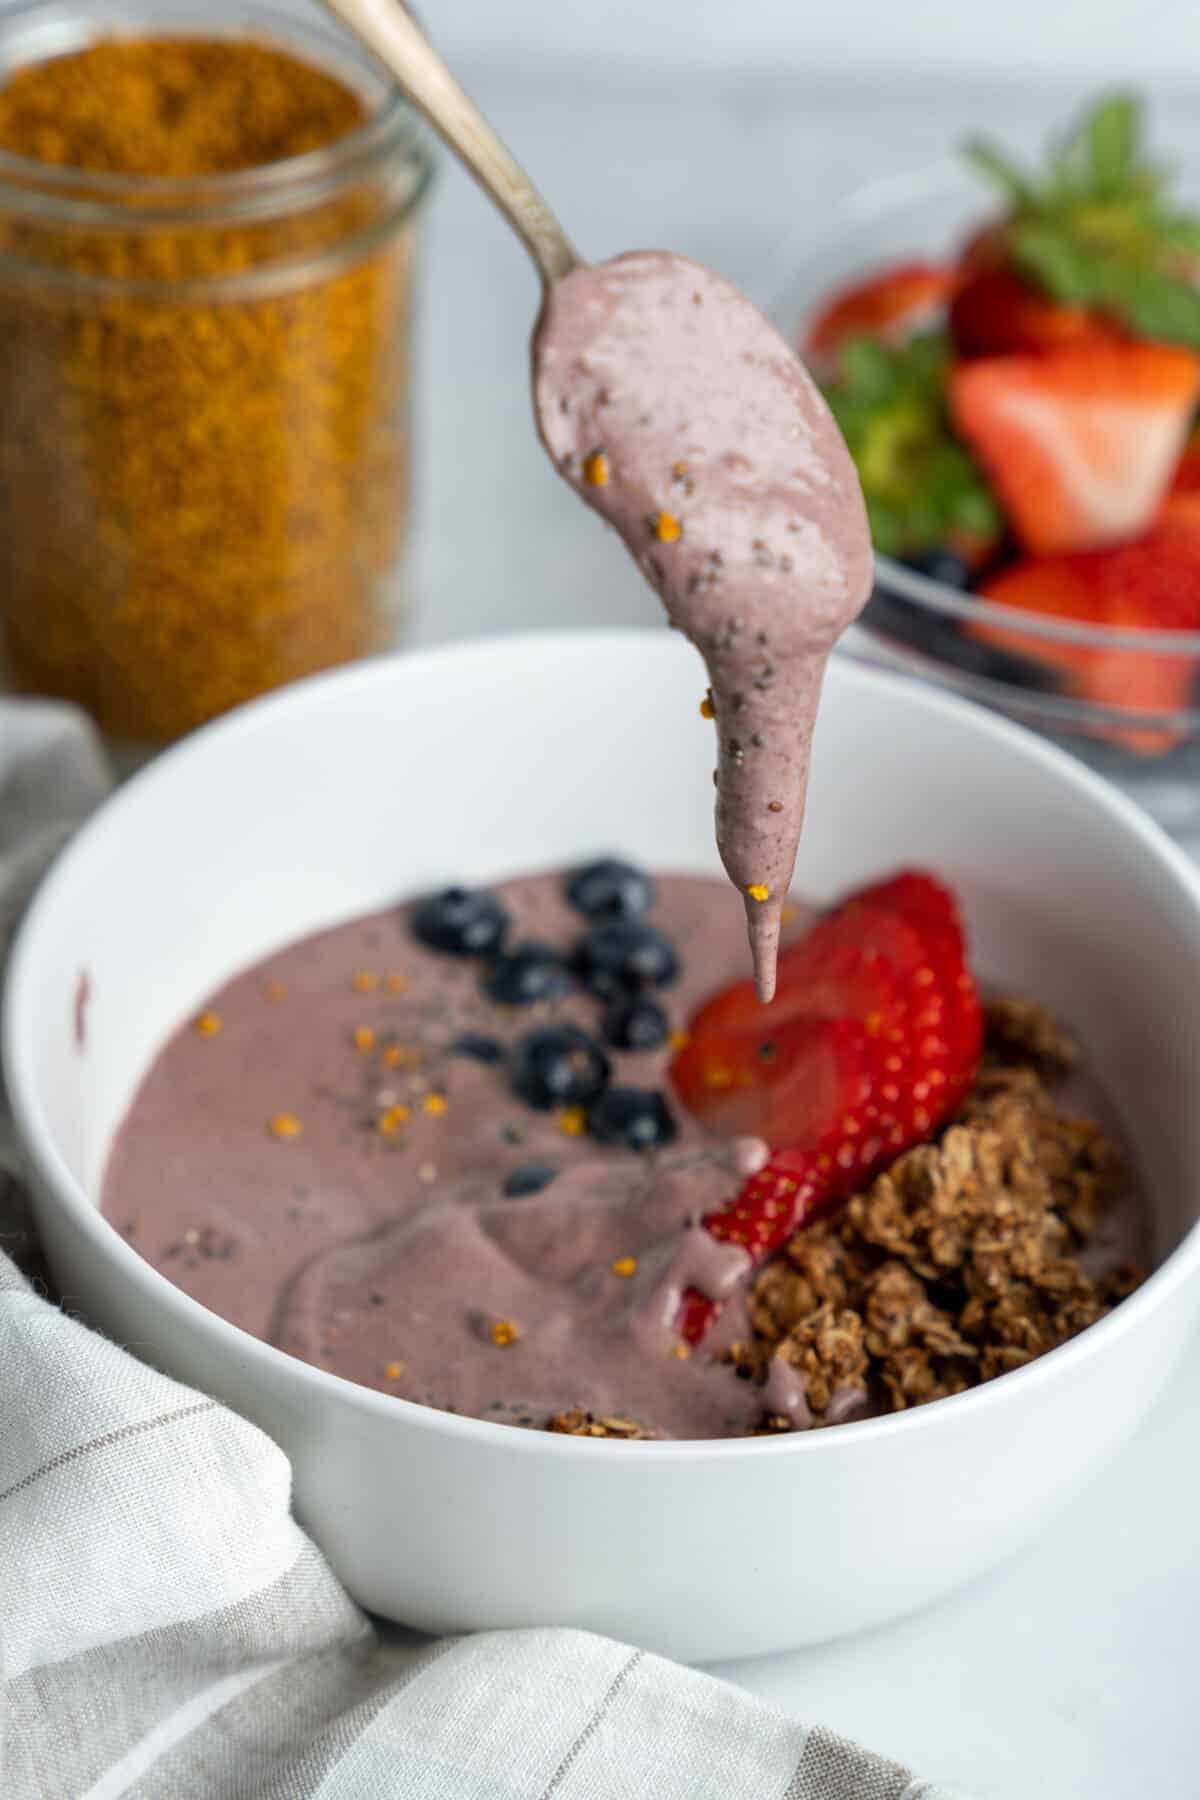 Spoon scooping from an acai protein bowl.